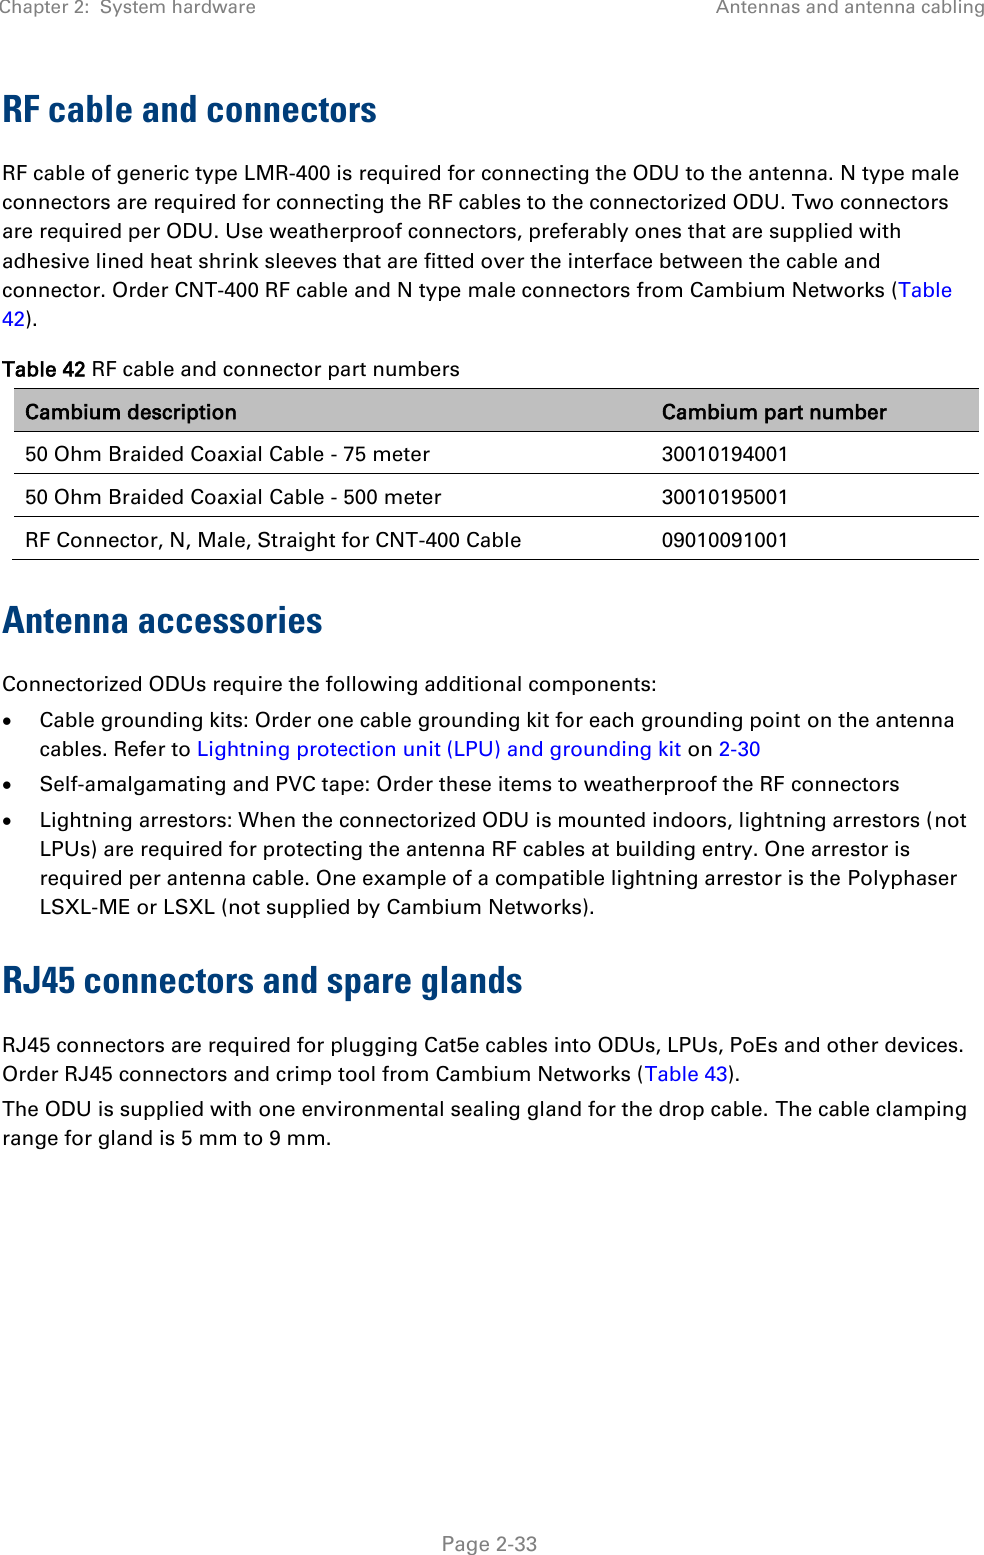 Chapter 2:  System hardware Antennas and antenna cabling   Page 2-33 RF cable and connectors RF cable of generic type LMR-400 is required for connecting the ODU to the antenna. N type male connectors are required for connecting the RF cables to the connectorized ODU. Two connectors are required per ODU. Use weatherproof connectors, preferably ones that are supplied with adhesive lined heat shrink sleeves that are fitted over the interface between the cable and connector. Order CNT-400 RF cable and N type male connectors from Cambium Networks (Table 42). Table 42 RF cable and connector part numbers Cambium description Cambium part number 50 Ohm Braided Coaxial Cable - 75 meter 30010194001 50 Ohm Braided Coaxial Cable - 500 meter 30010195001 RF Connector, N, Male, Straight for CNT-400 Cable 09010091001 Antenna accessories Connectorized ODUs require the following additional components:  Cable grounding kits: Order one cable grounding kit for each grounding point on the antenna cables. Refer to Lightning protection unit (LPU) and grounding kit on 2-30  Self-amalgamating and PVC tape: Order these items to weatherproof the RF connectors  Lightning arrestors: When the connectorized ODU is mounted indoors, lightning arrestors (not LPUs) are required for protecting the antenna RF cables at building entry. One arrestor is required per antenna cable. One example of a compatible lightning arrestor is the Polyphaser LSXL-ME or LSXL (not supplied by Cambium Networks). RJ45 connectors and spare glands RJ45 connectors are required for plugging Cat5e cables into ODUs, LPUs, PoEs and other devices. Order RJ45 connectors and crimp tool from Cambium Networks (Table 43). The ODU is supplied with one environmental sealing gland for the drop cable. The cable clamping range for gland is 5 mm to 9 mm.  